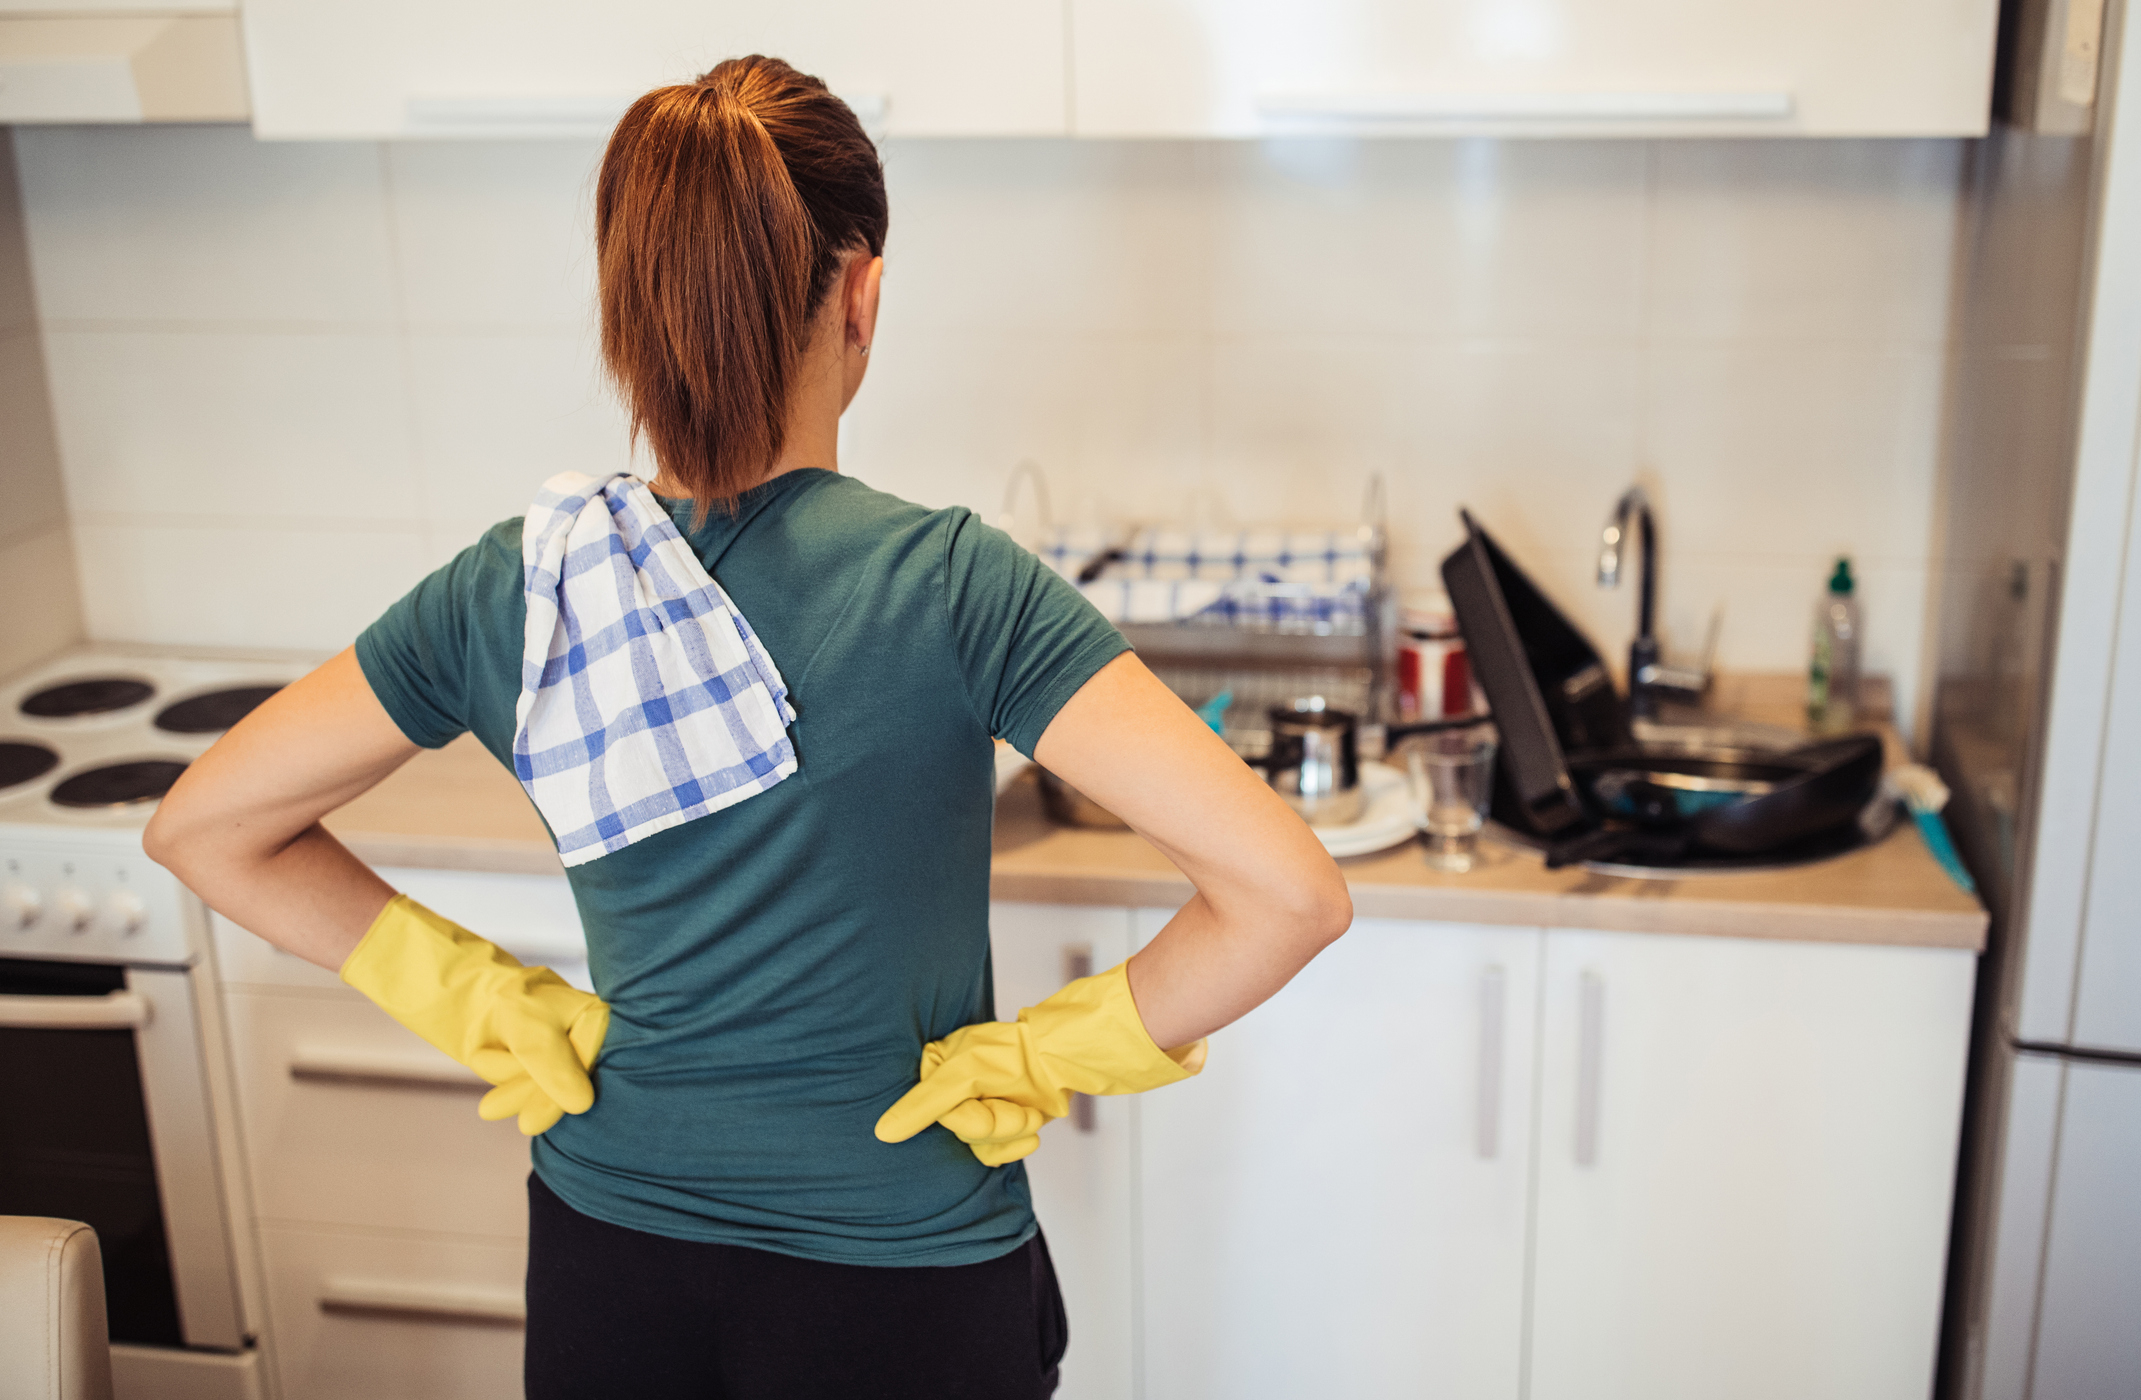 Woman with rubber gloves stands with hands on hips facing dirty kitchen, ready to clean